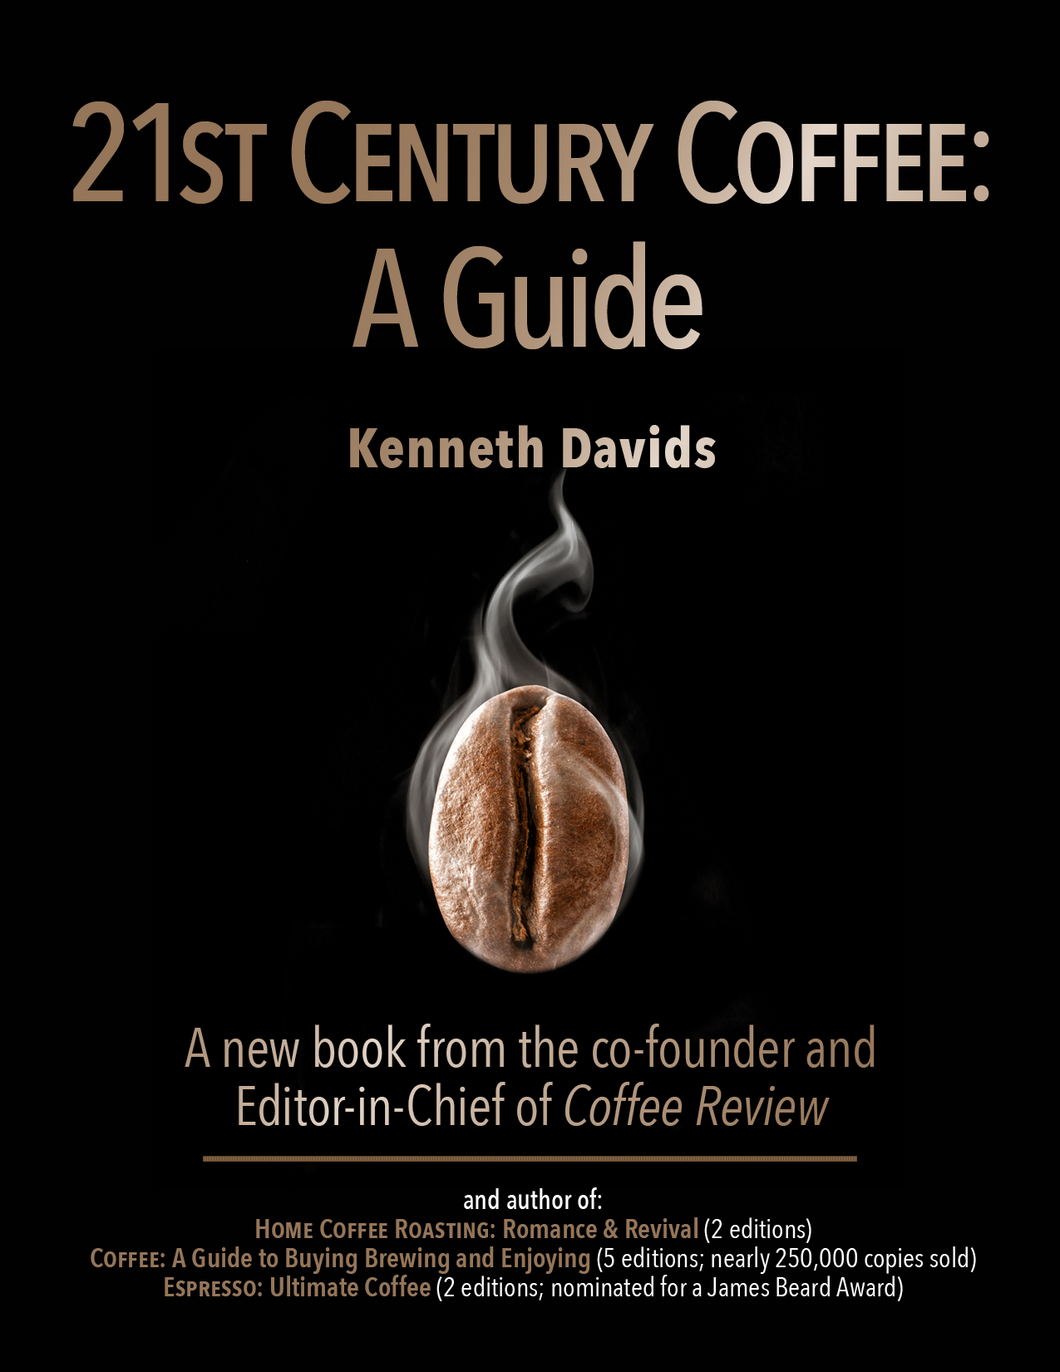 21st Century Coffee: A Guide - kennethdavids